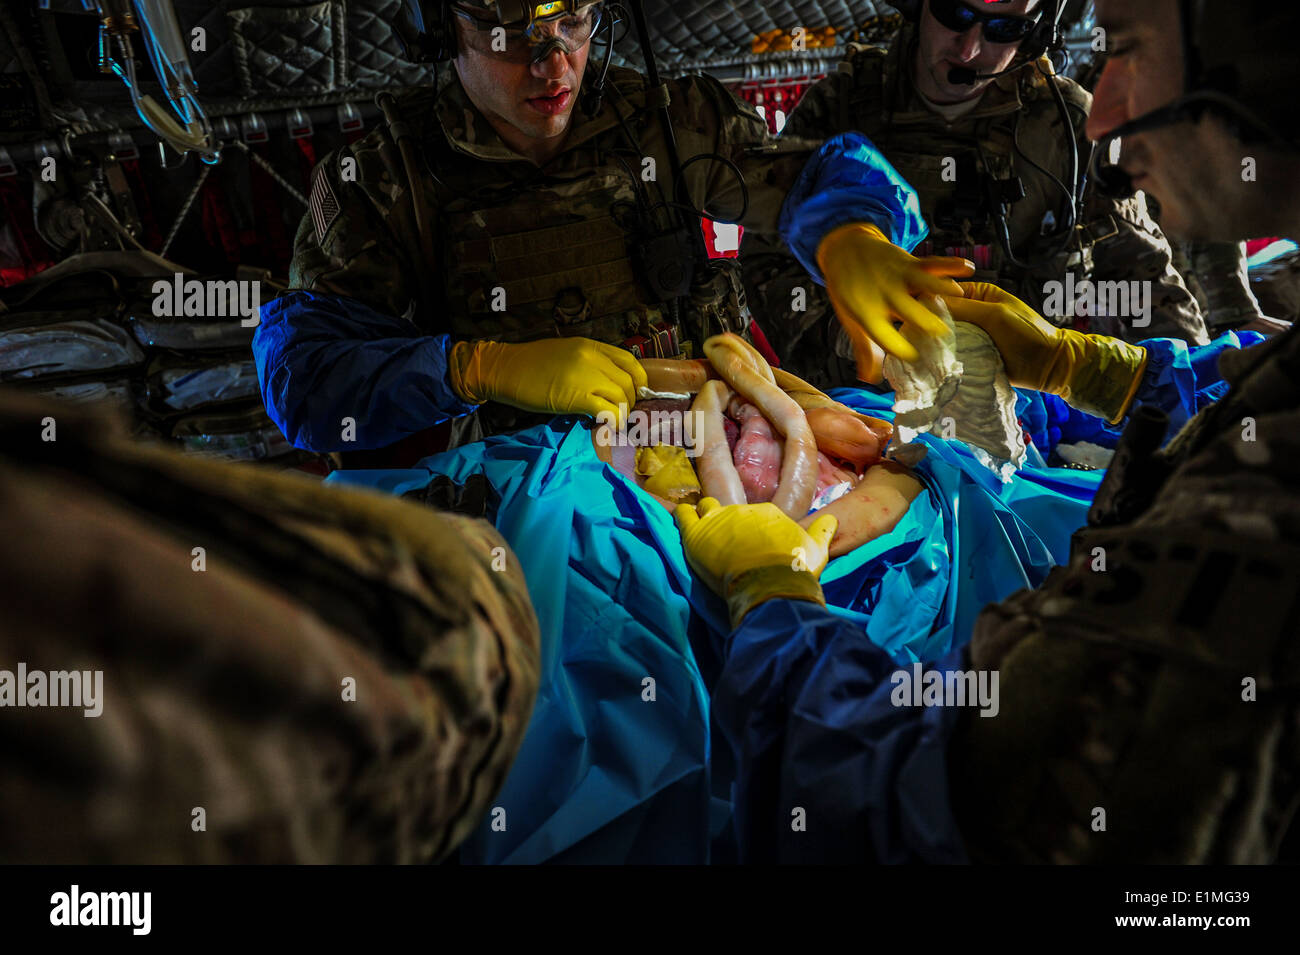 U.S. Air Force combat medics treat a simulated wound aboard an Army CH-47 Chinook helicopter during Emerald Warrior 14 at Hurlb Stock Photo